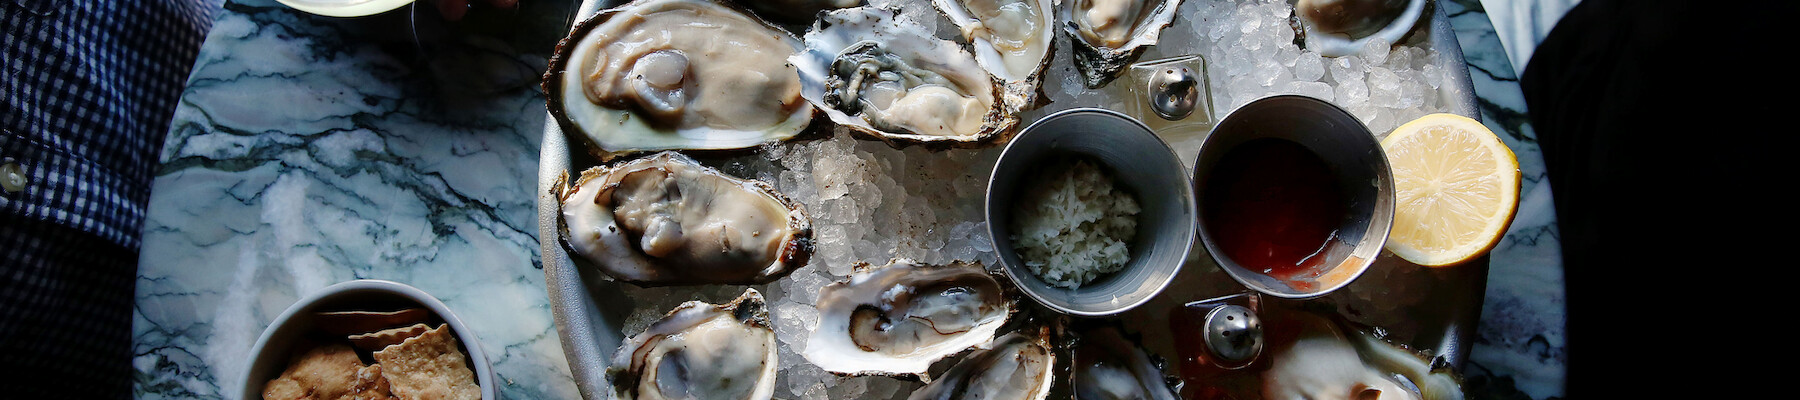 A platter of oysters on a table, accompanied by beverages, crackers, lemon, and sauce, with hands holding glasses in the background.